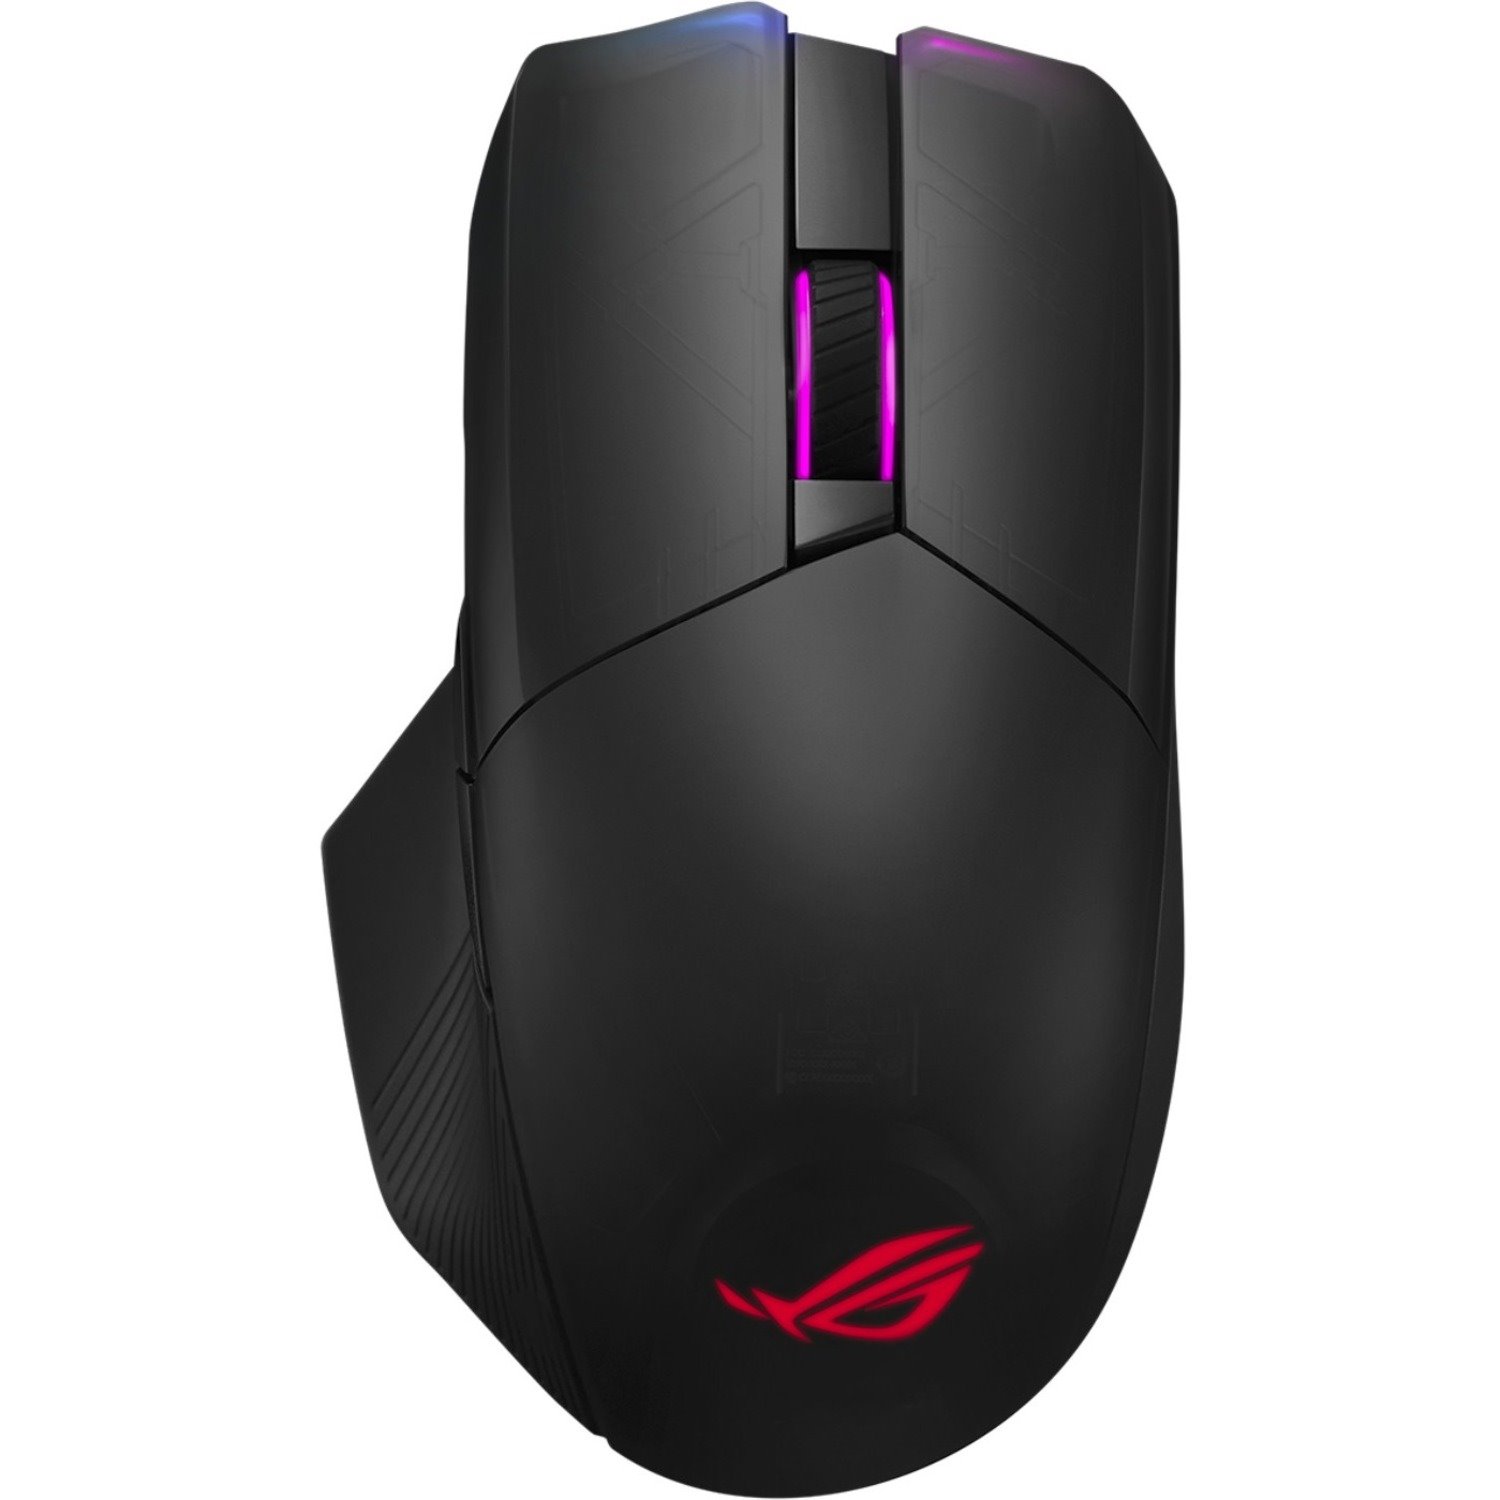 Asus ROG Chakram Gaming Mouse - Bluetooth/Radio Frequency - USB - Optical - 7 Button(s) - Black - 1 Pack